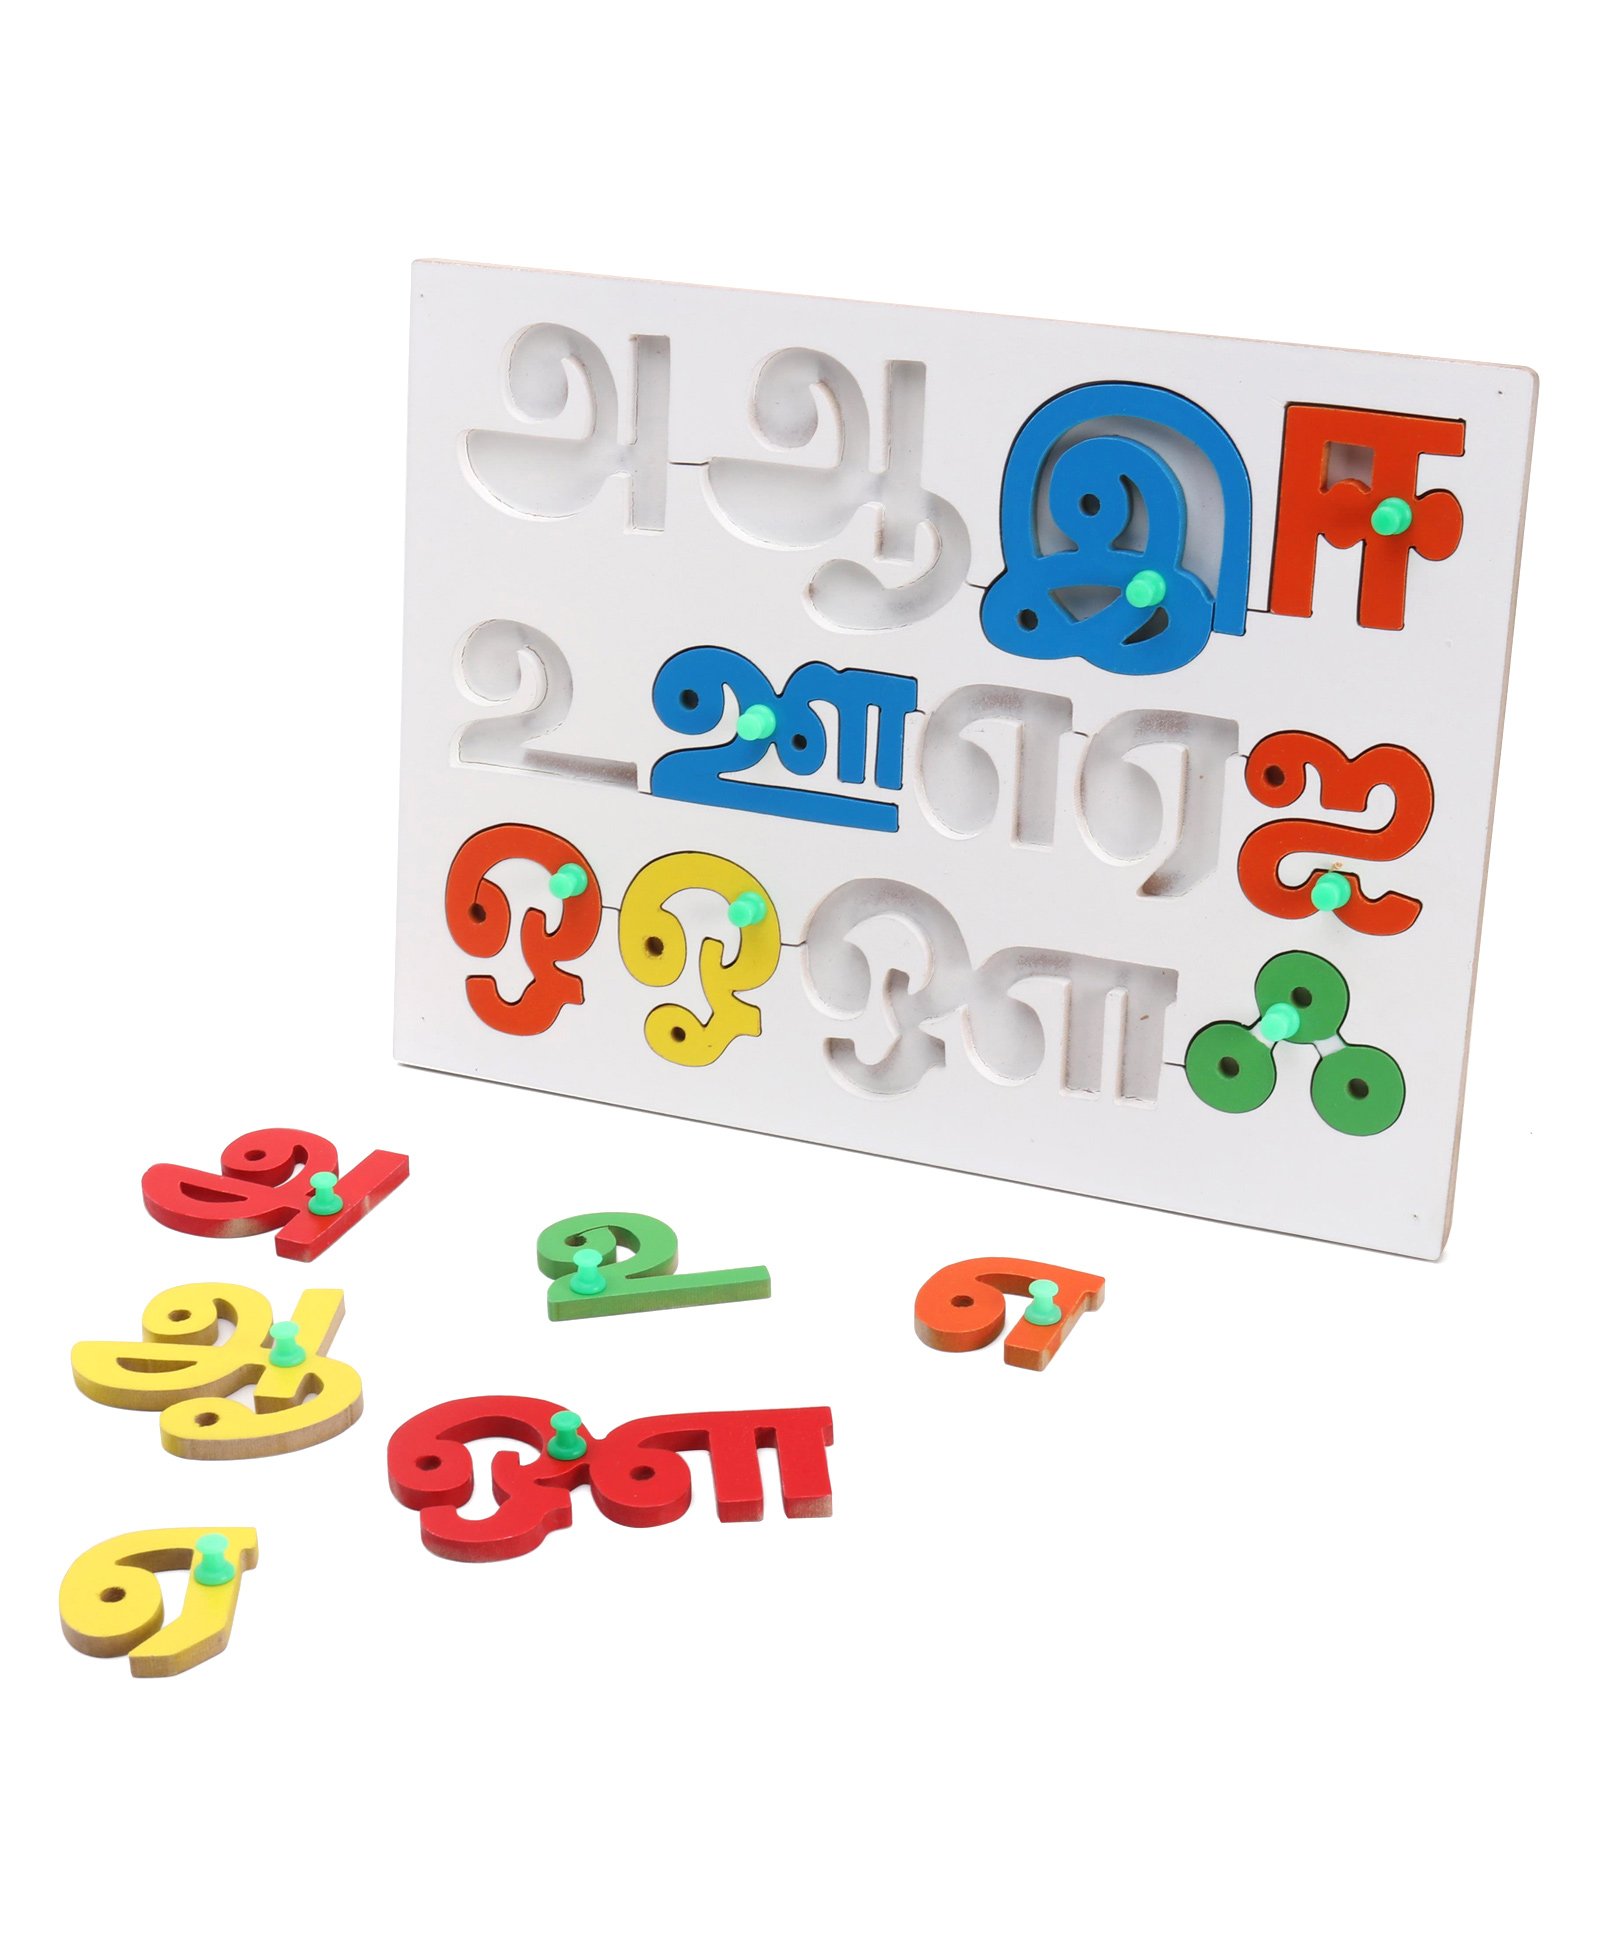 Little Genius Wooden Tamil Vowels Knob & Peg Puzzle - Multicolour Online  India, Buy Puzzle Games & Toys for (3-6 Years) at  - 2679126